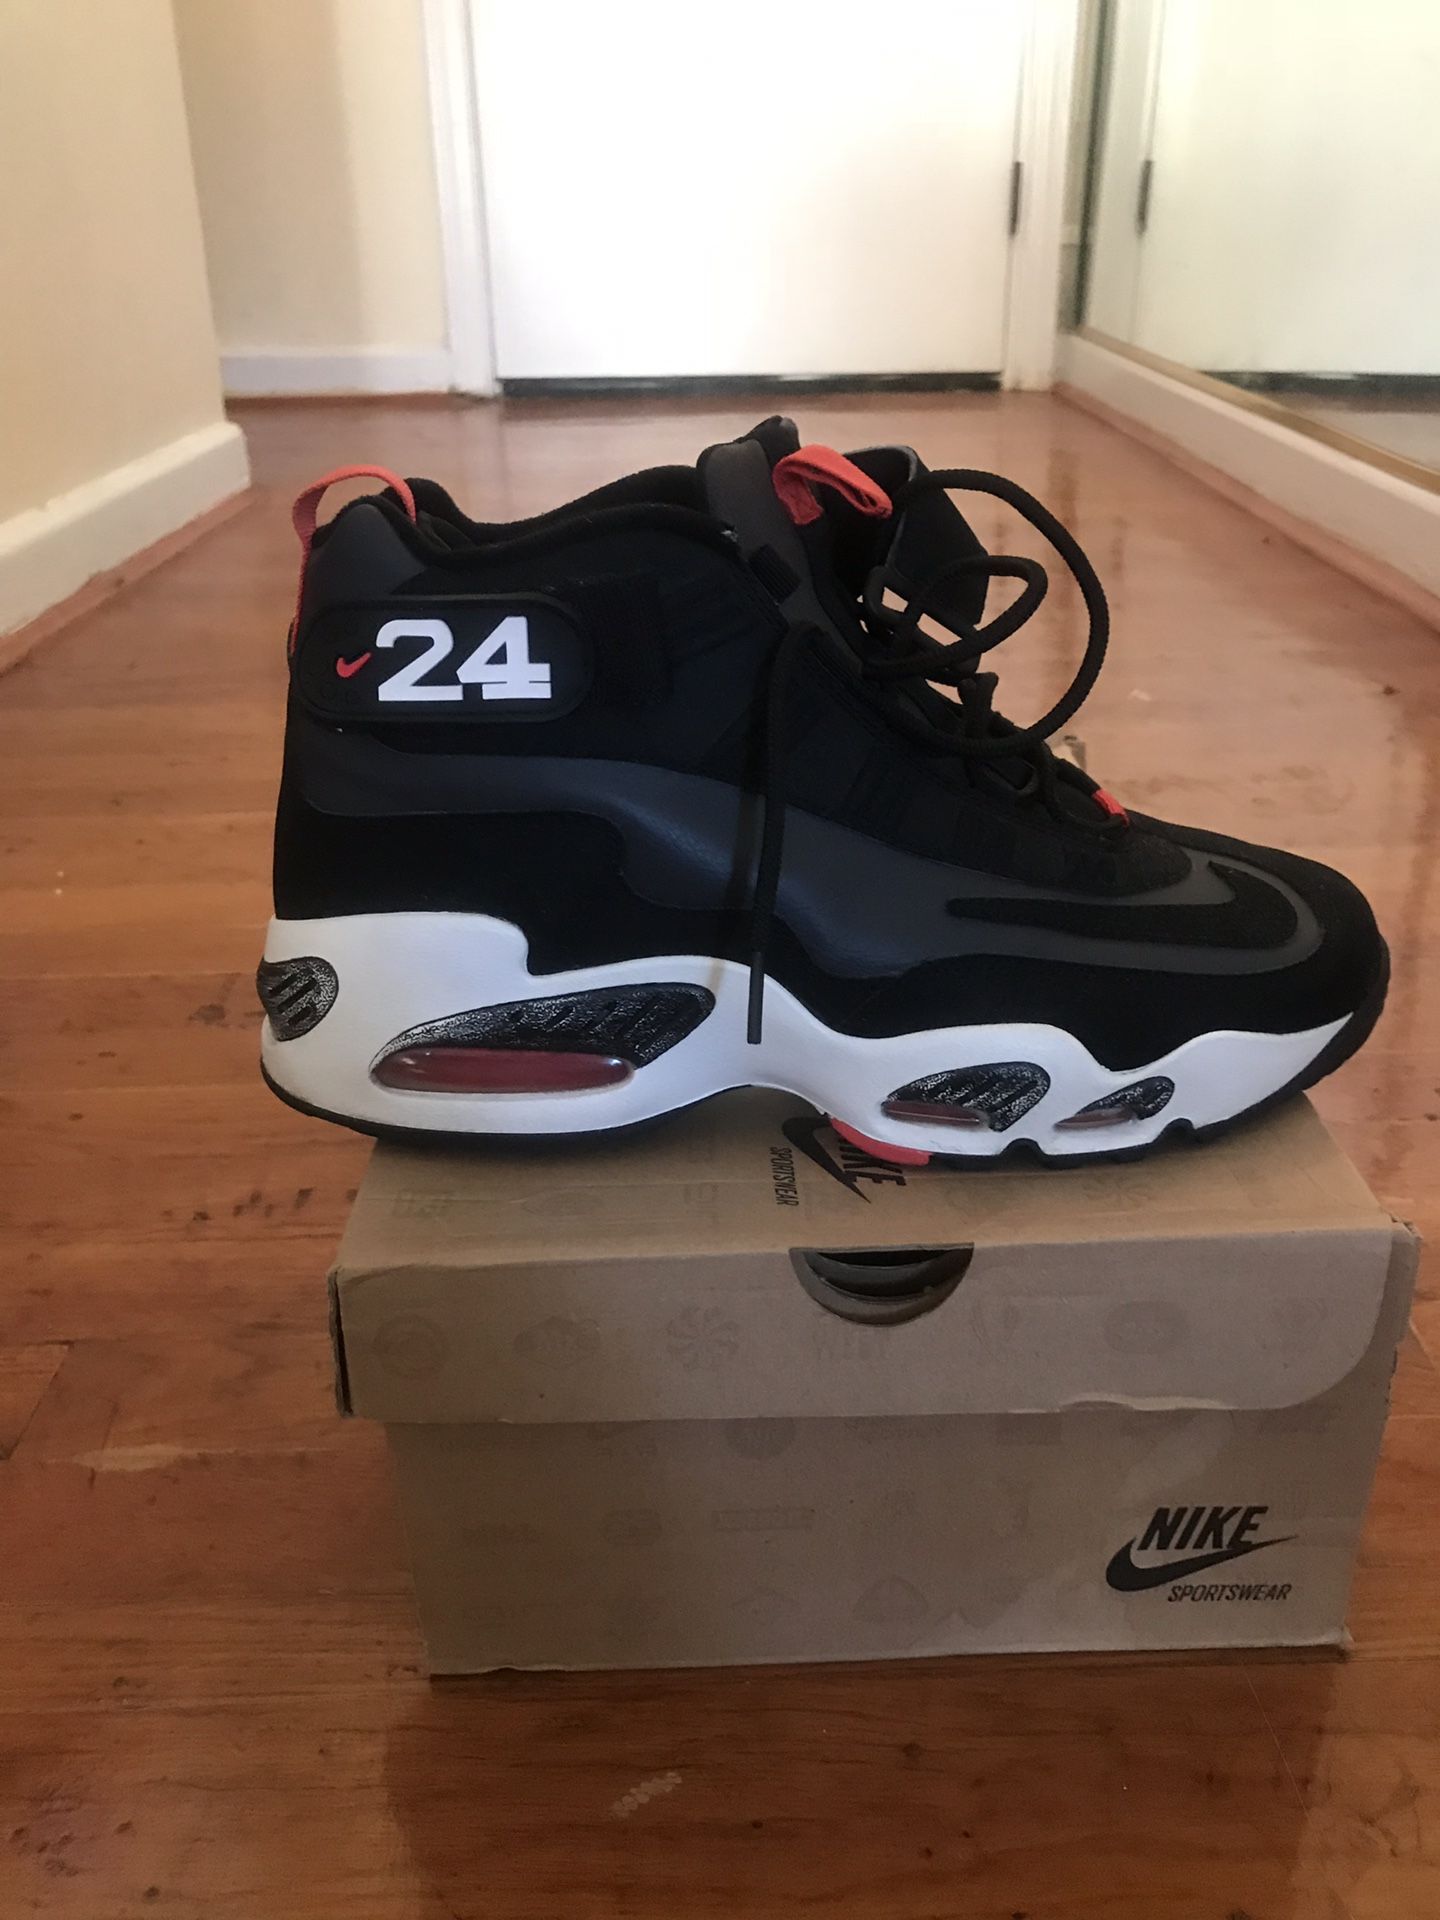 Air Griffey Max 1 Size 9.5 excellent condition